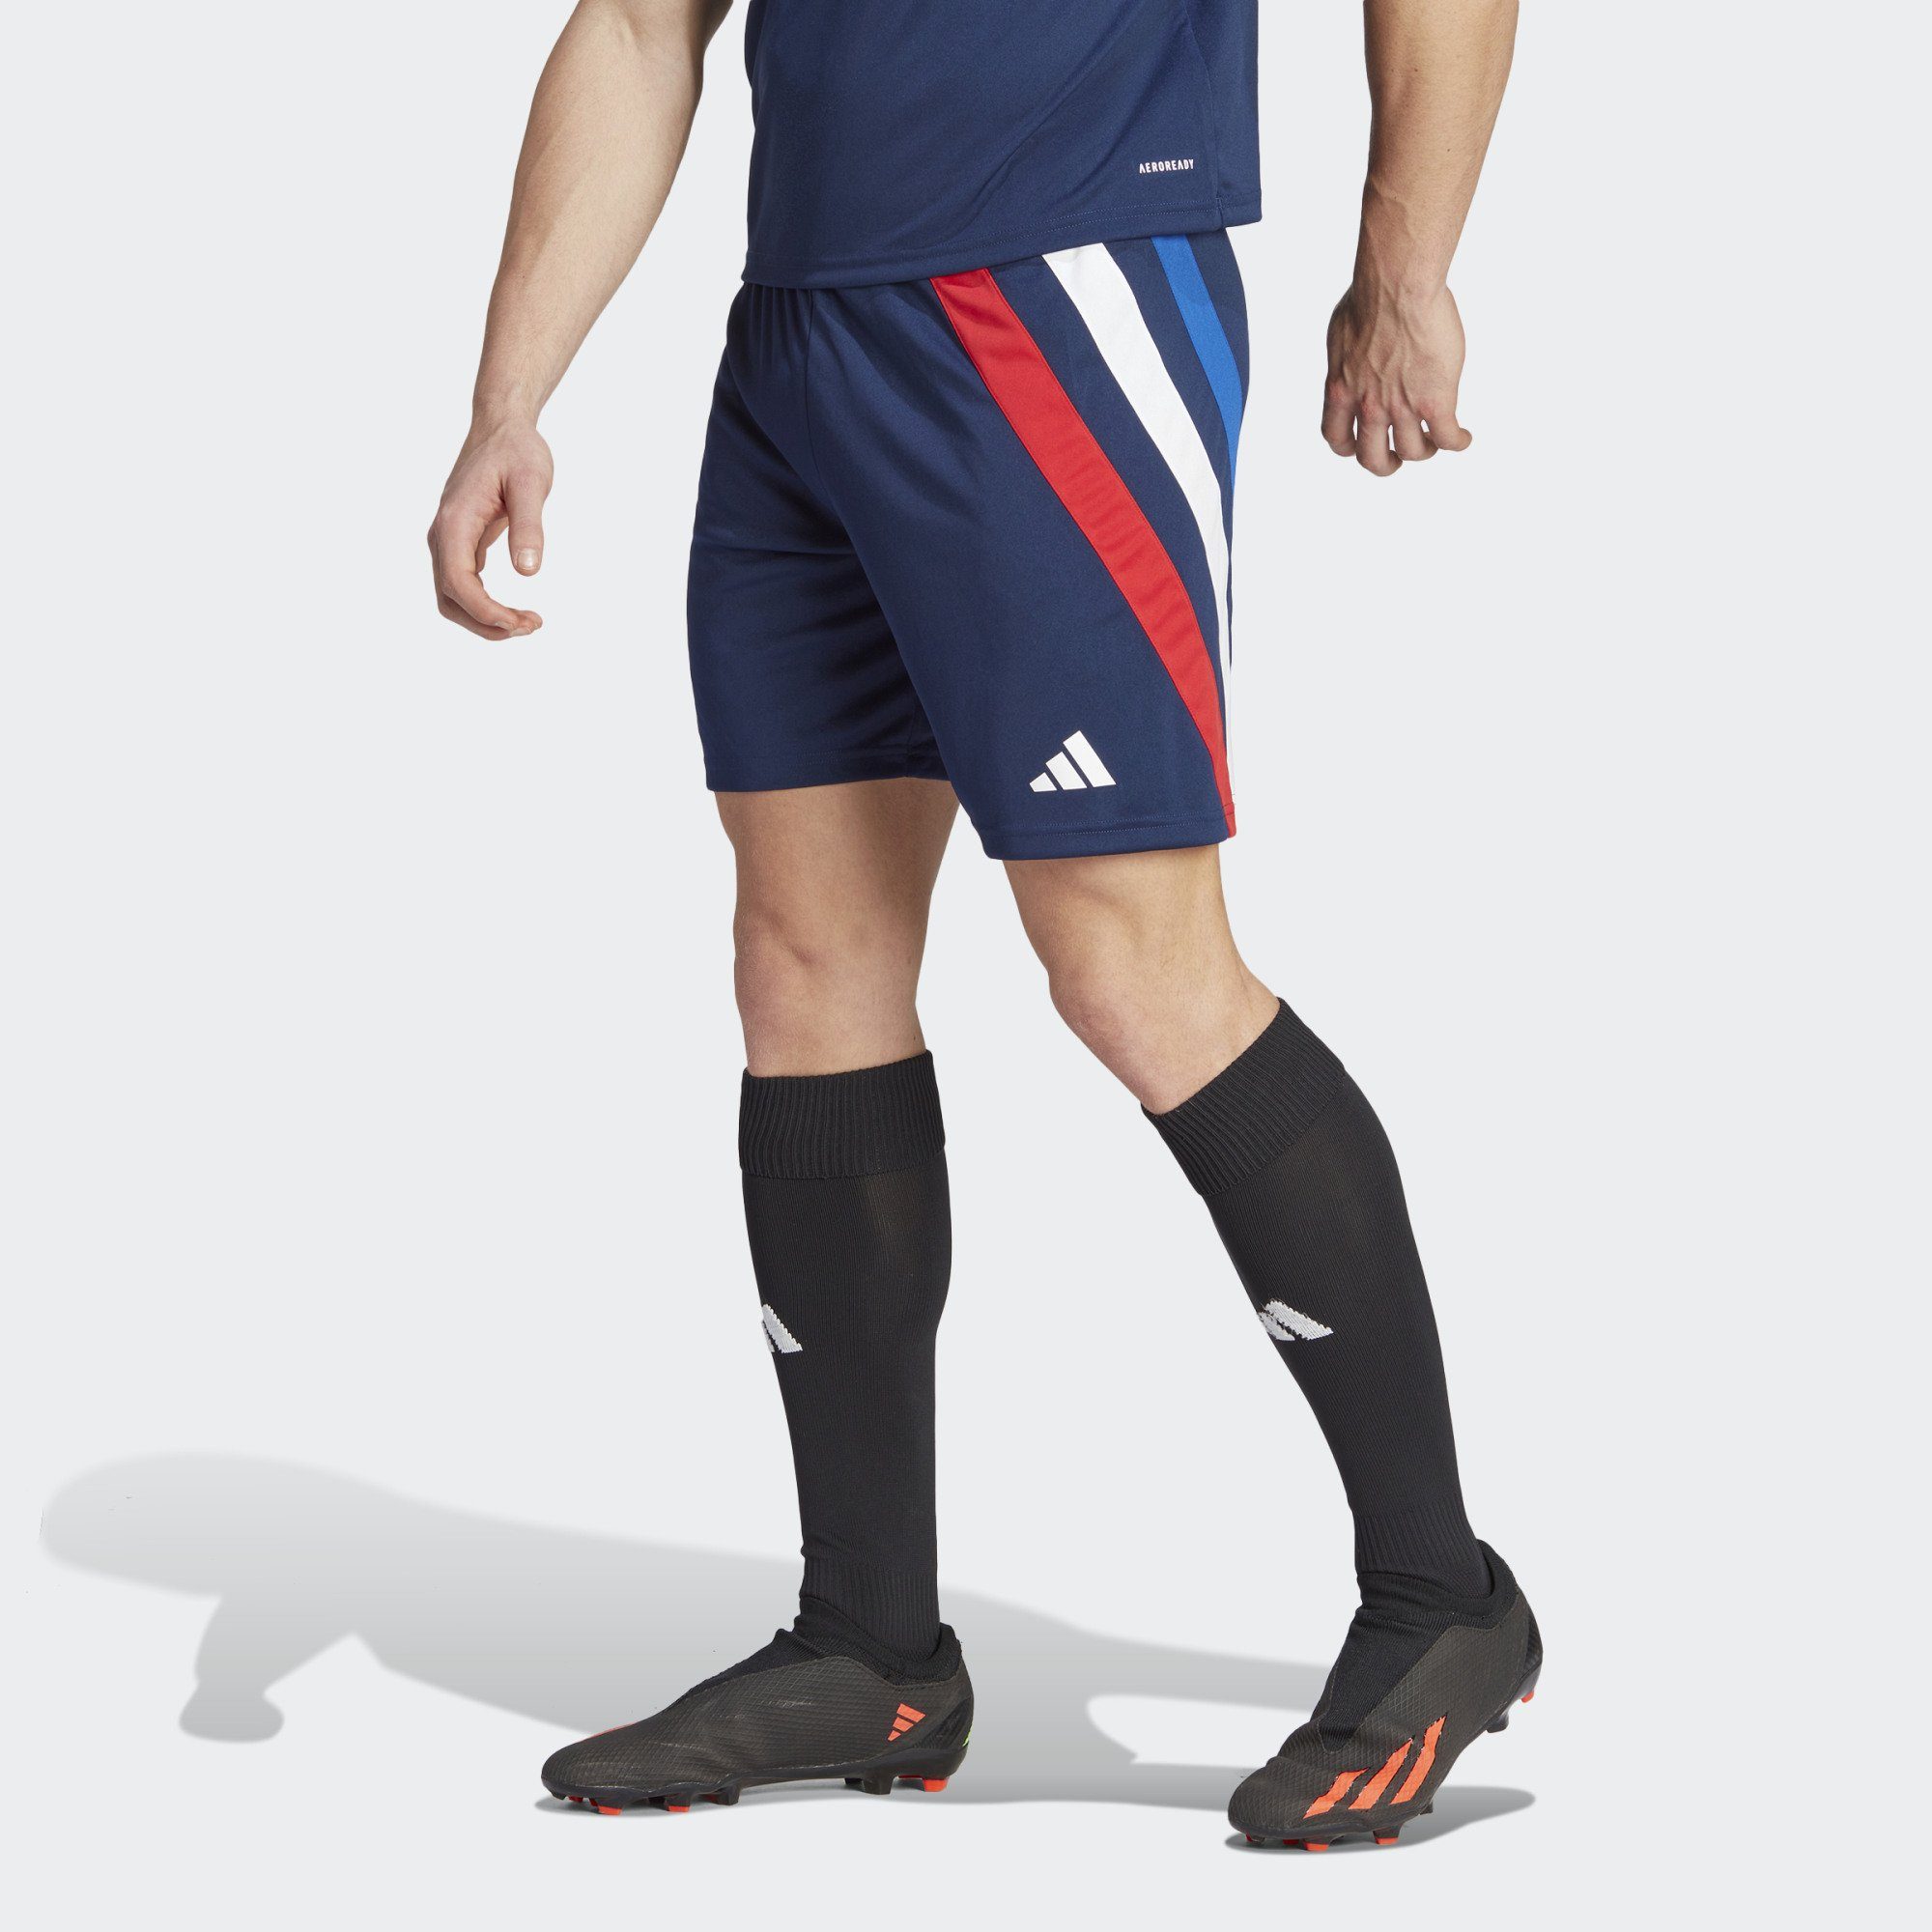 adidas Performance Funktionsshorts FORTORE 23 SHORTS Team Navy Blue 2 / Royal Blue / White / Team Collegiate Red